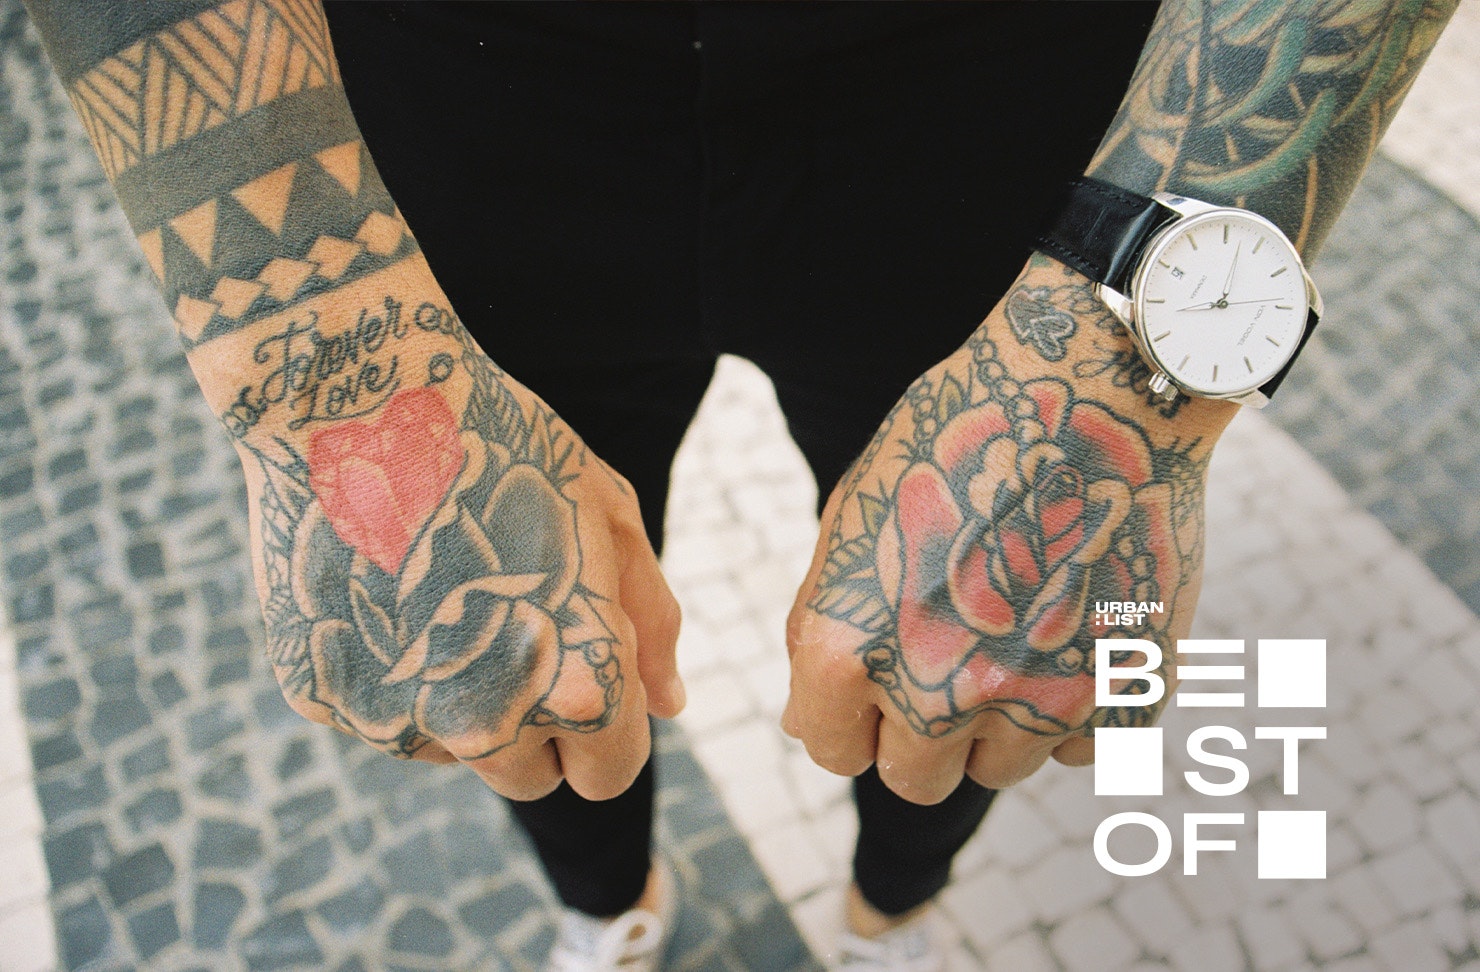 Wanna Get Inked? – Best tats & parlours in Hong Kong - Ovolo Hotels